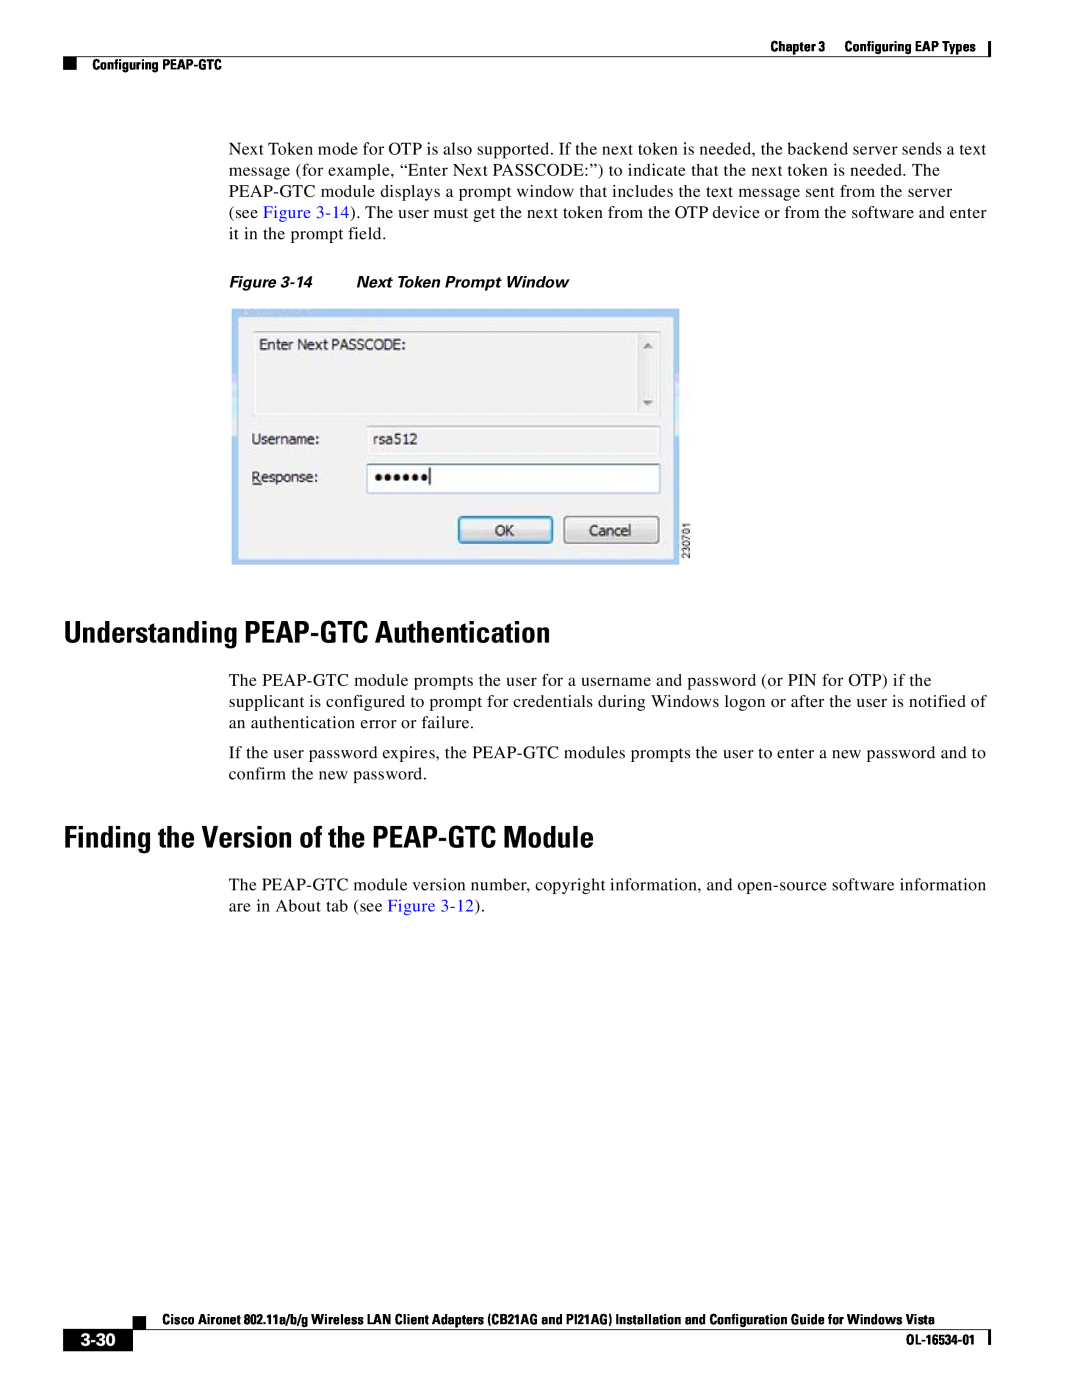 Cisco Systems PI21AG, CB21AG manual Understanding PEAP-GTC Authentication, Finding the Version of the PEAP-GTC Module, 3-30 